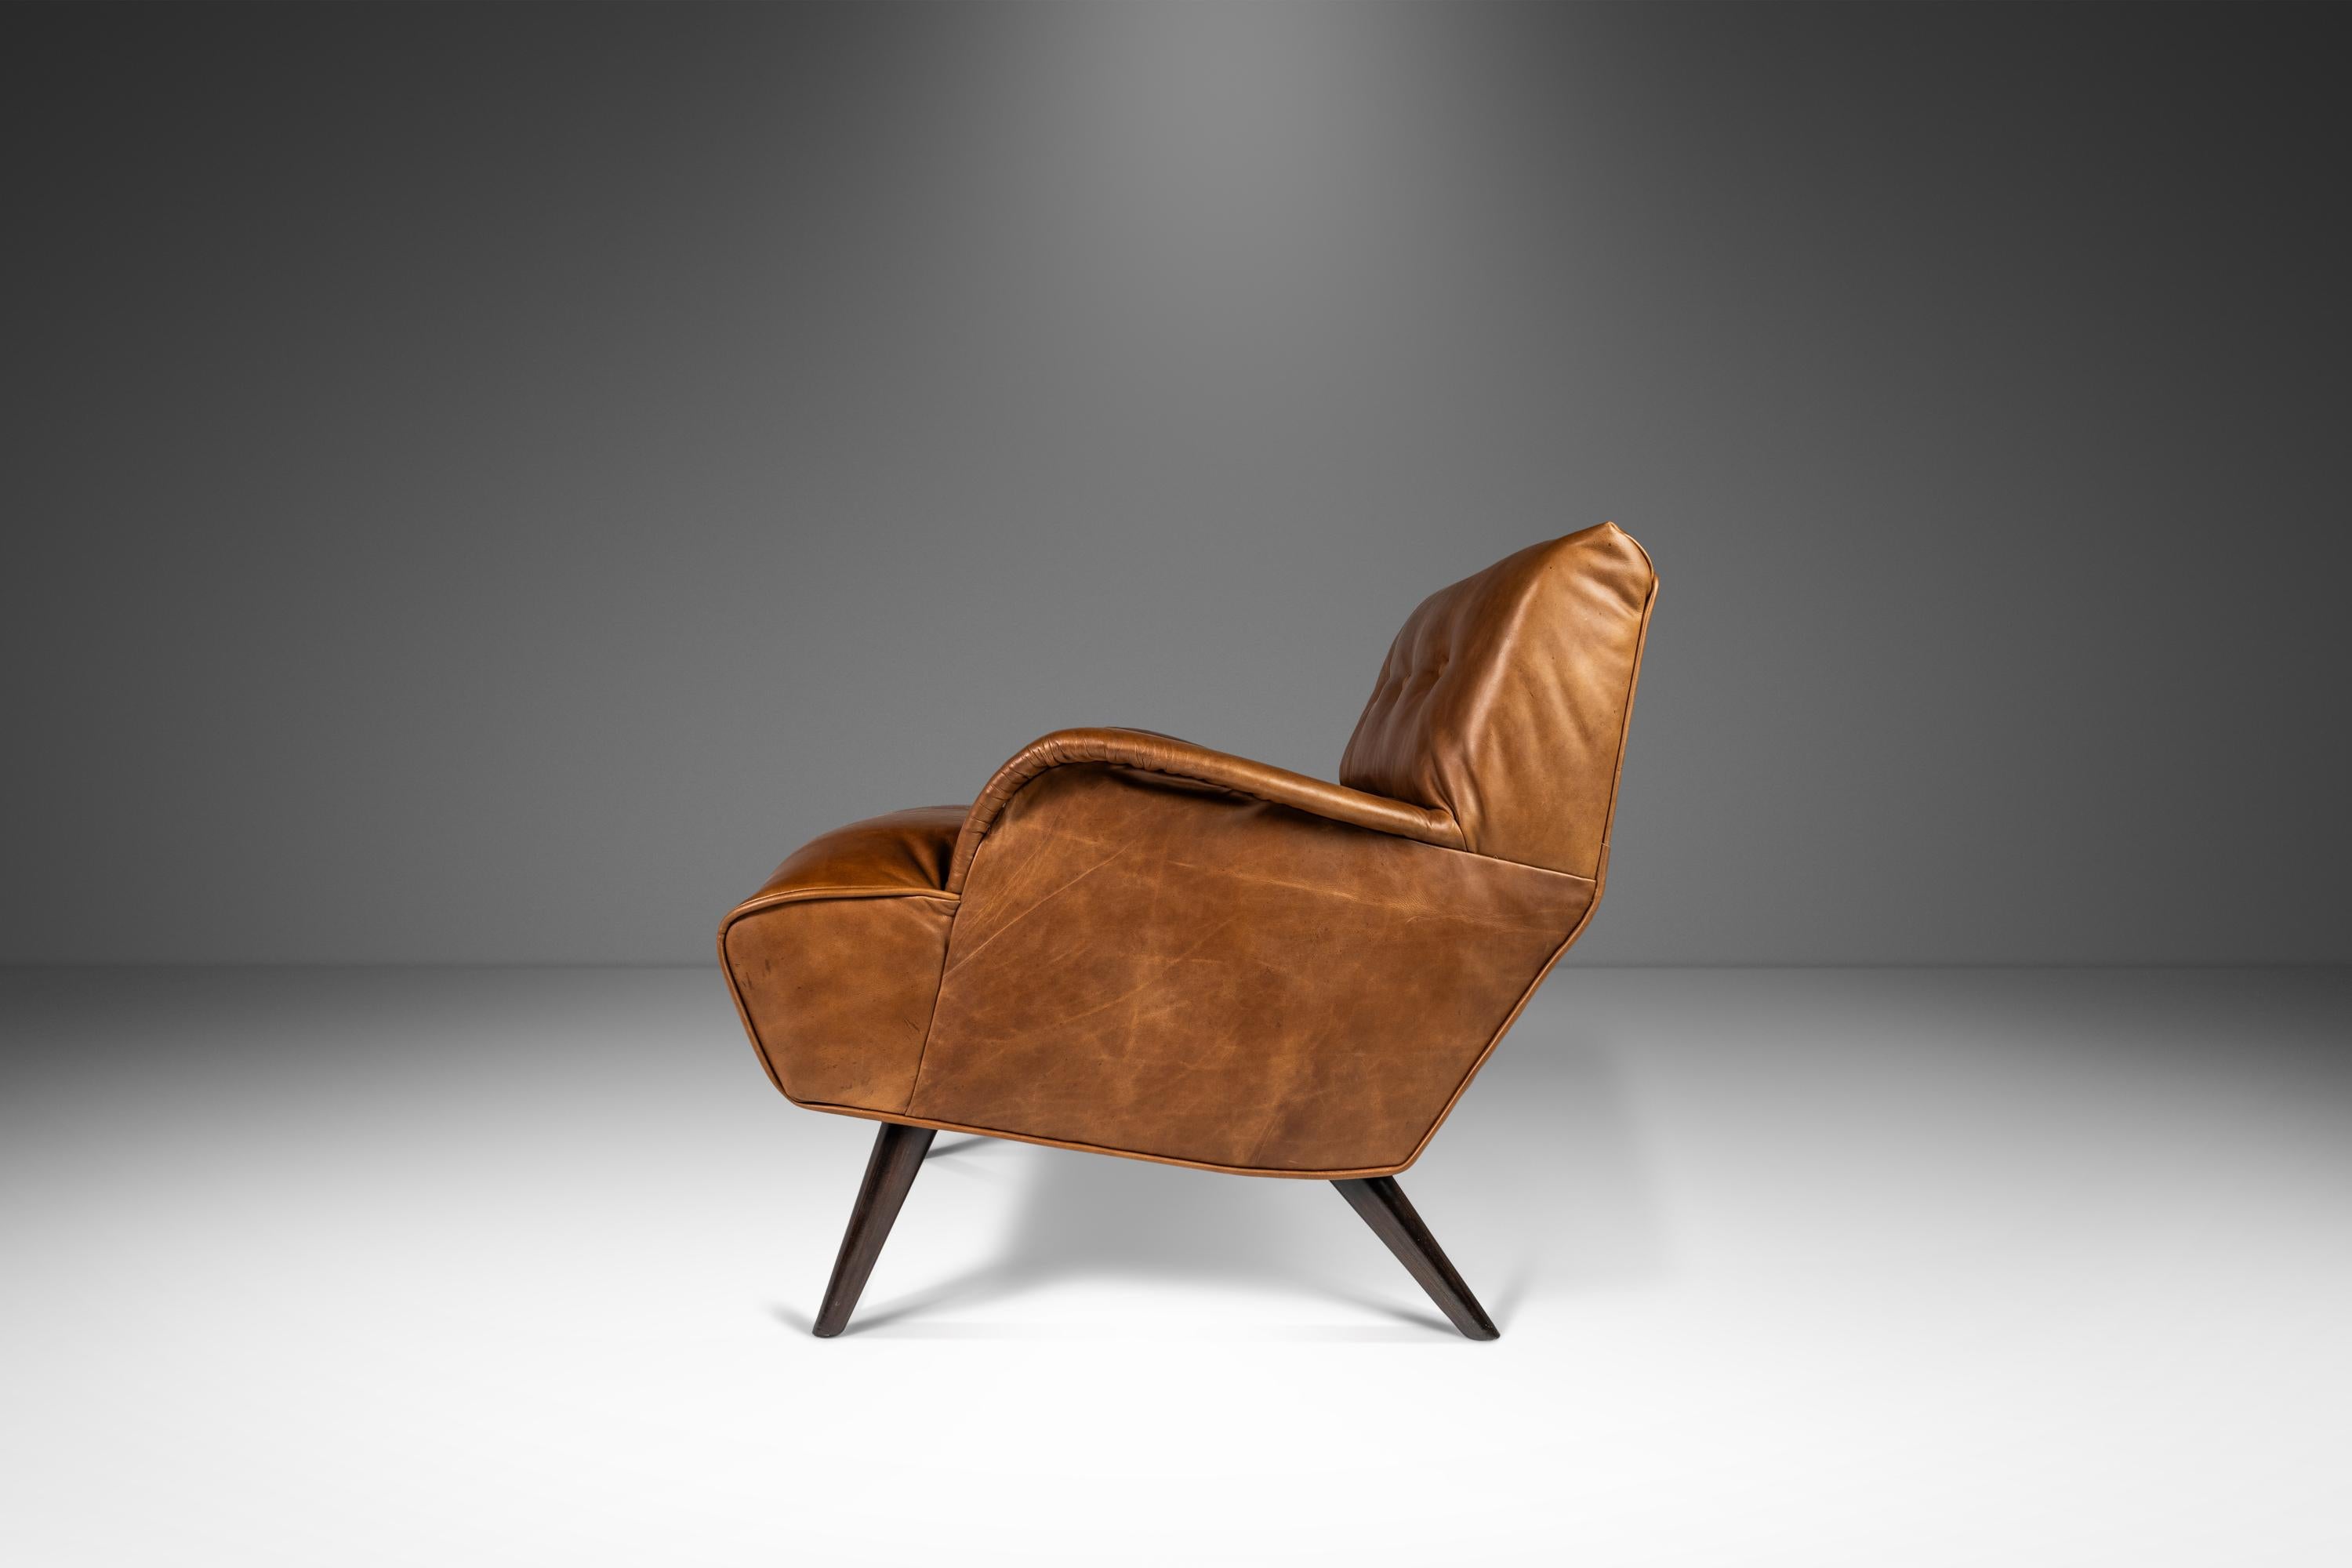 Simultaneously stylish and understated this exceptionally beautiful lounge chair, attributed to Carlo de Carli for Cassina, has recently undergone a comprehensive restoration process. Featuring newly upholstered genuine Italian leather, in a